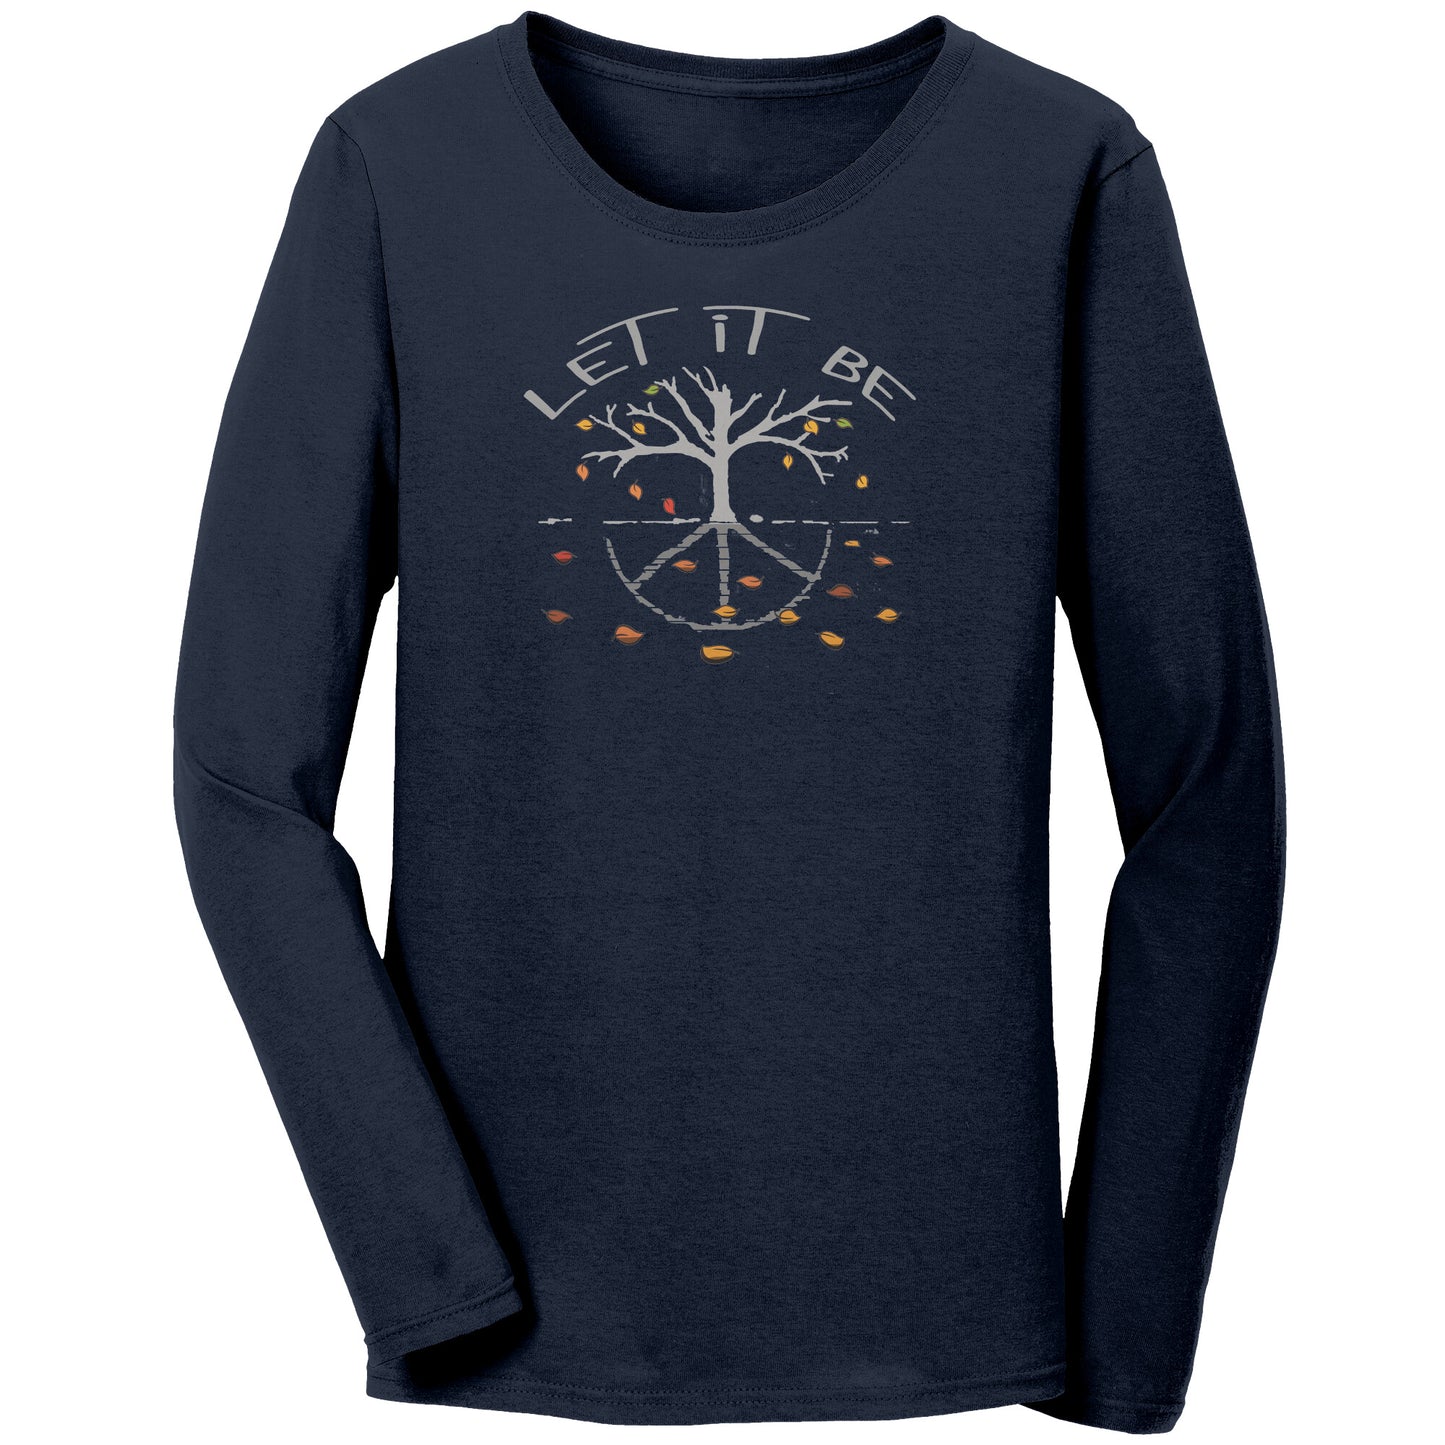 Let It Be Fall Ladies Long Sleeve T-shirt